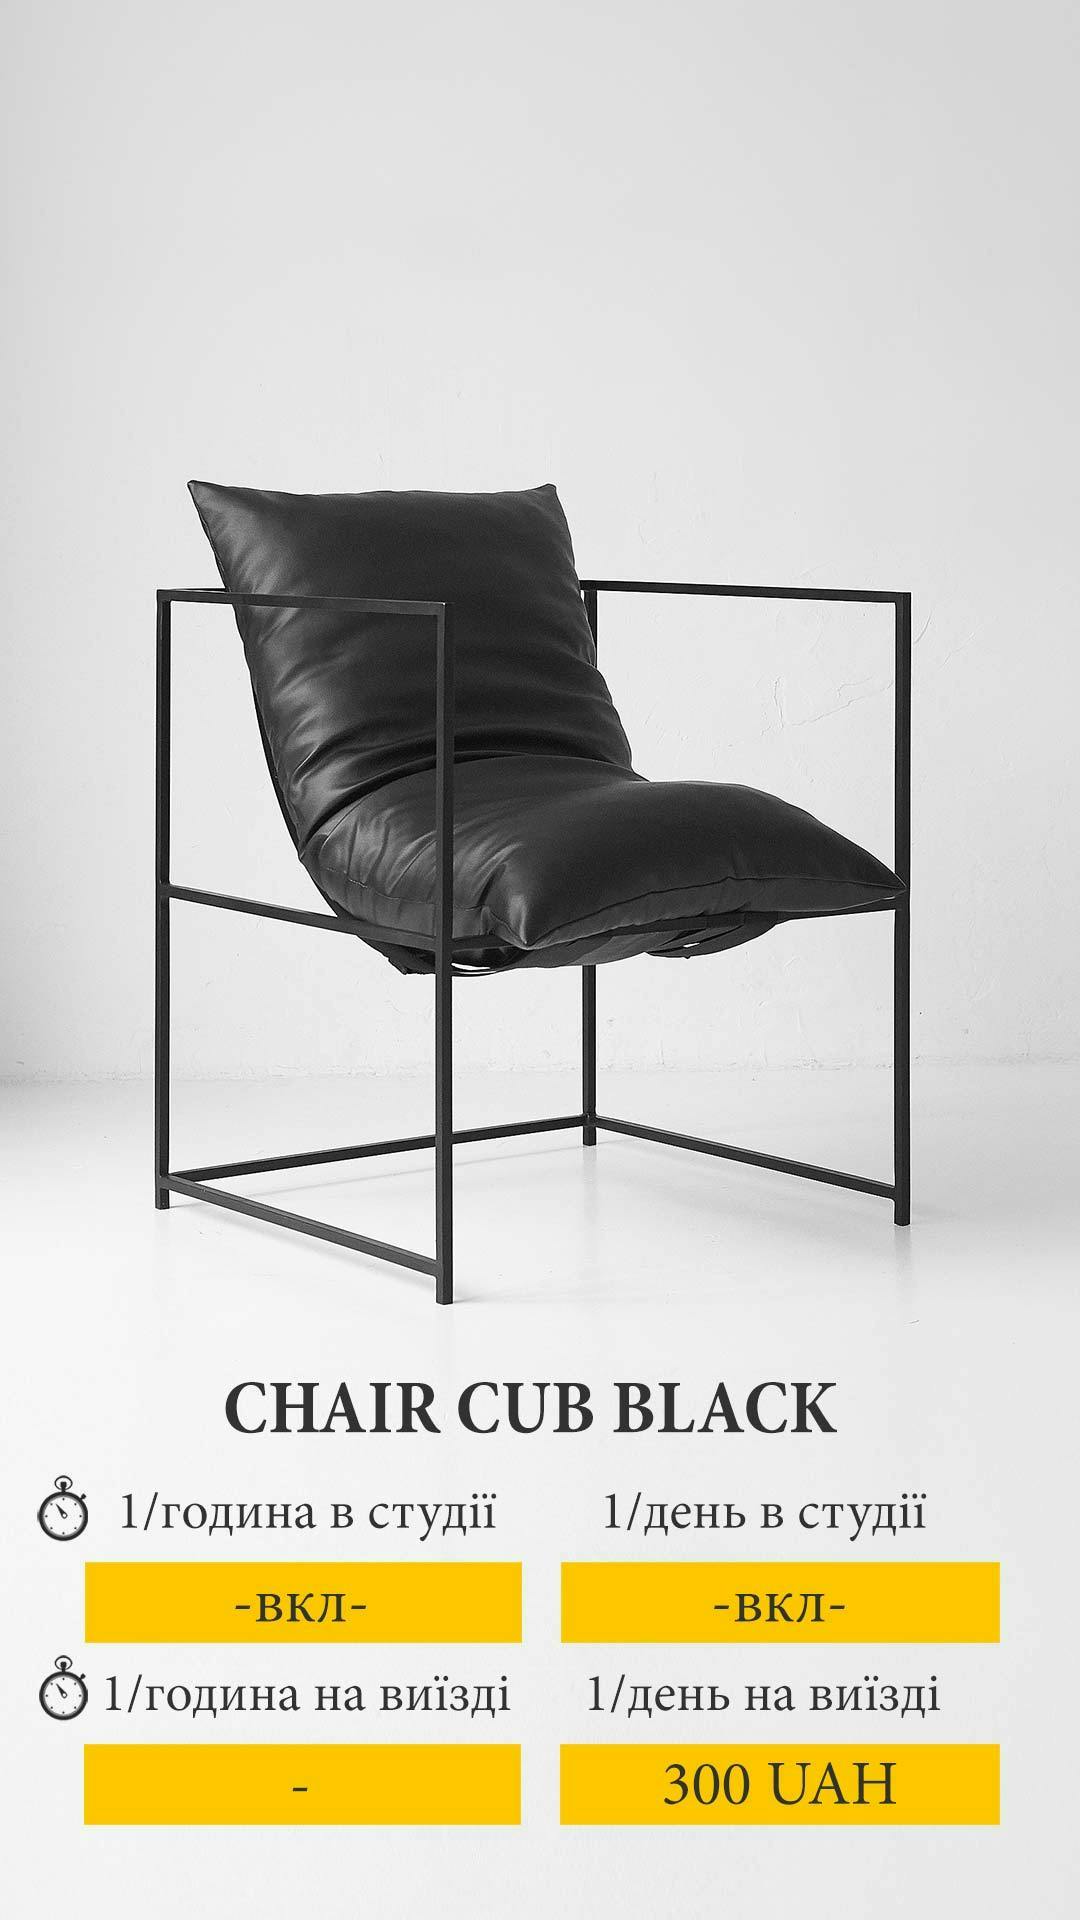 Cover image from chair_cub_black